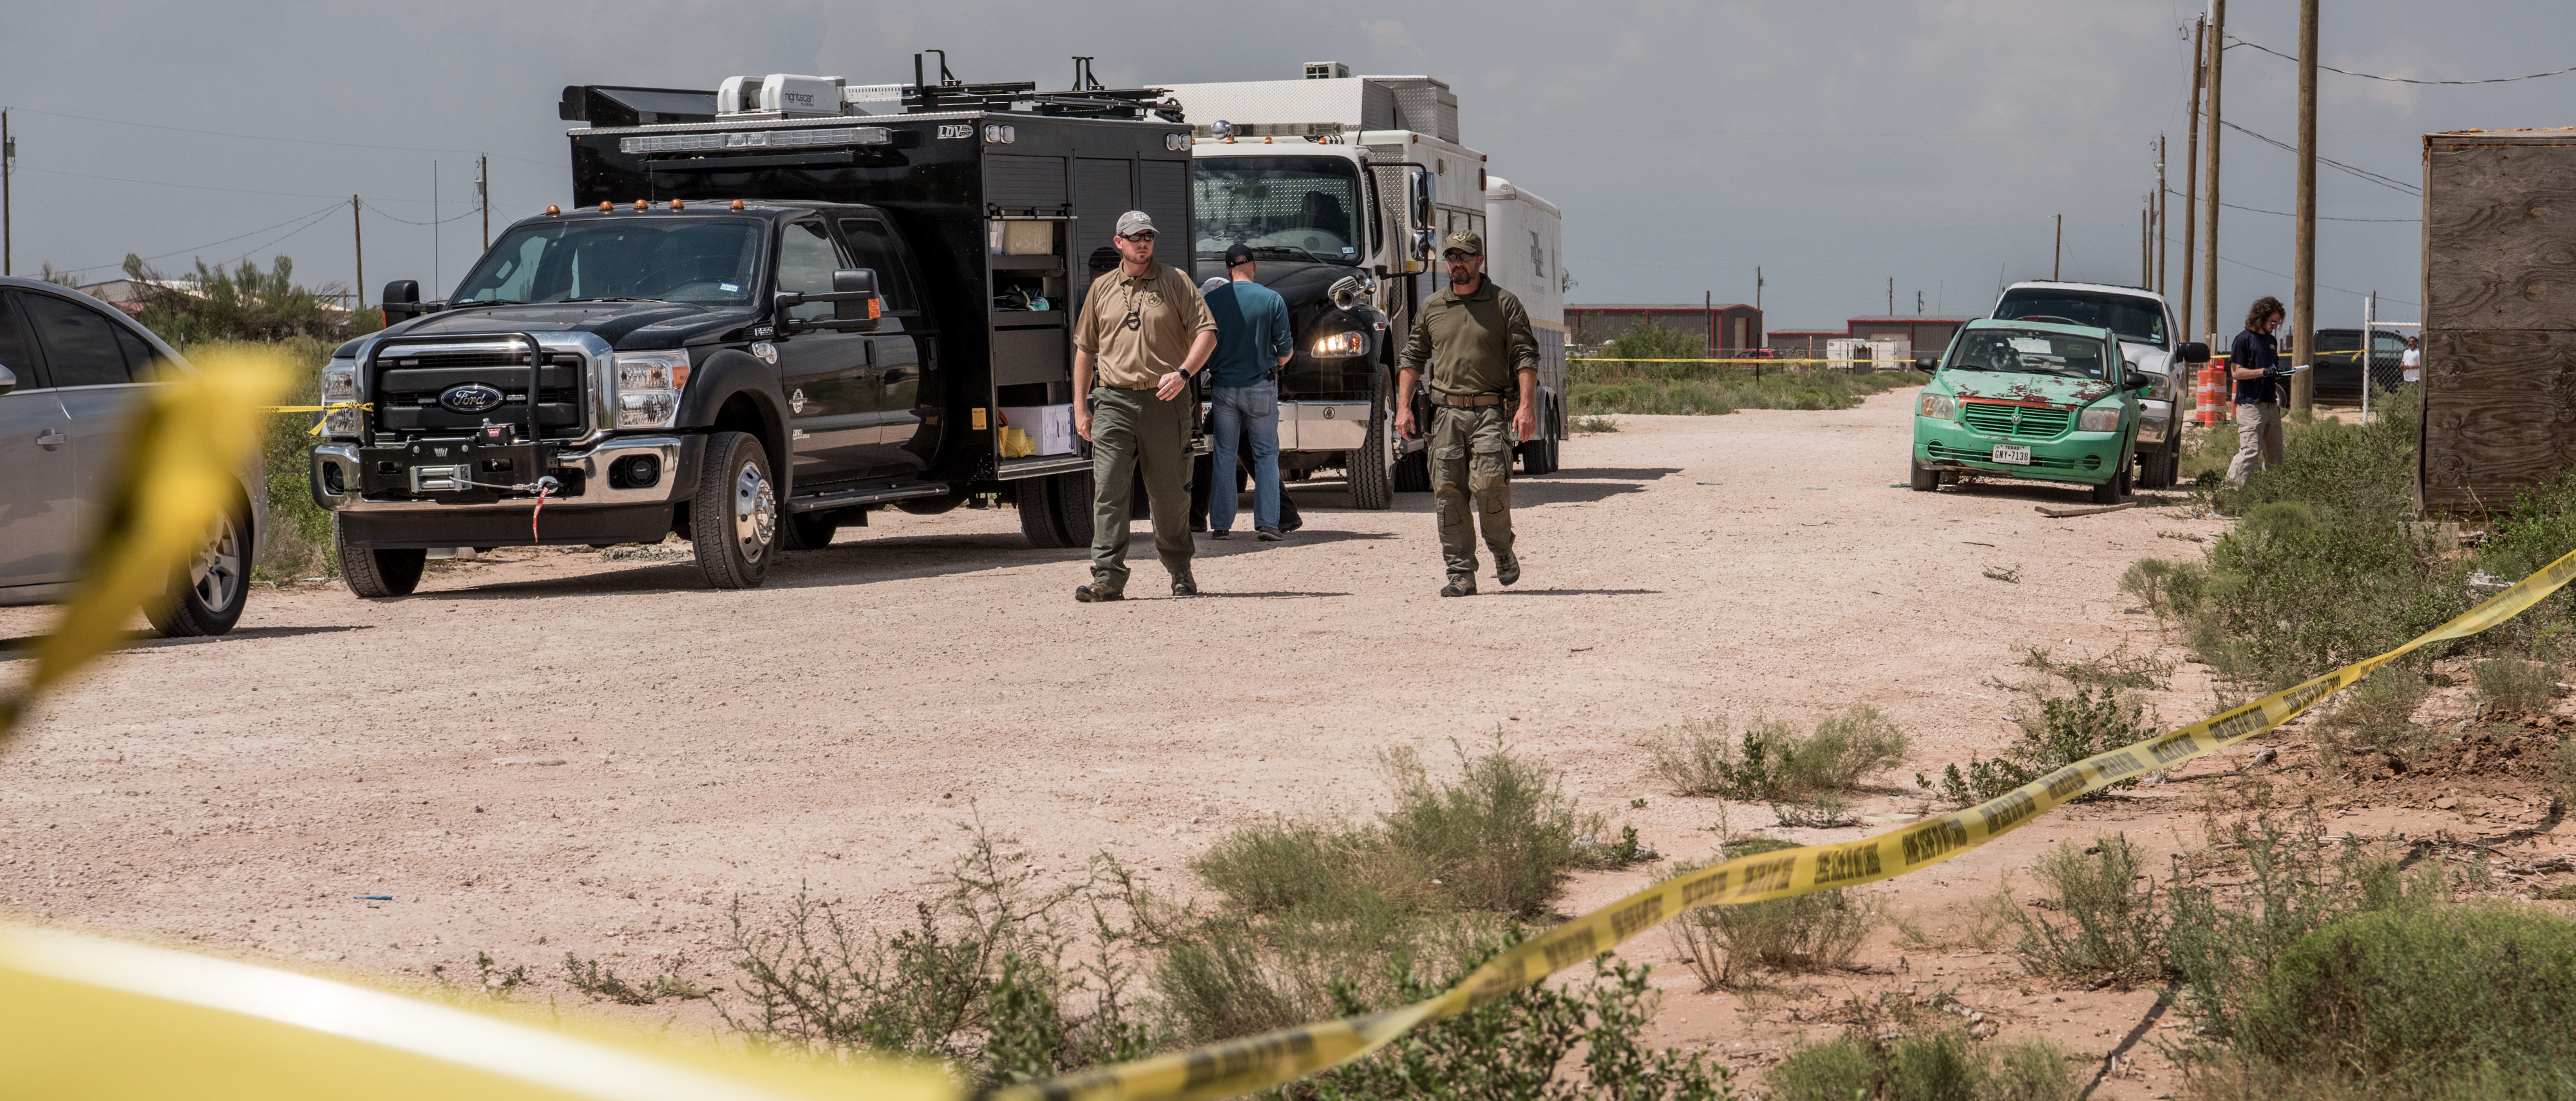 Suspect In Texas Shooting Reportedly Lost Job Before Rampage | The Daily Caller